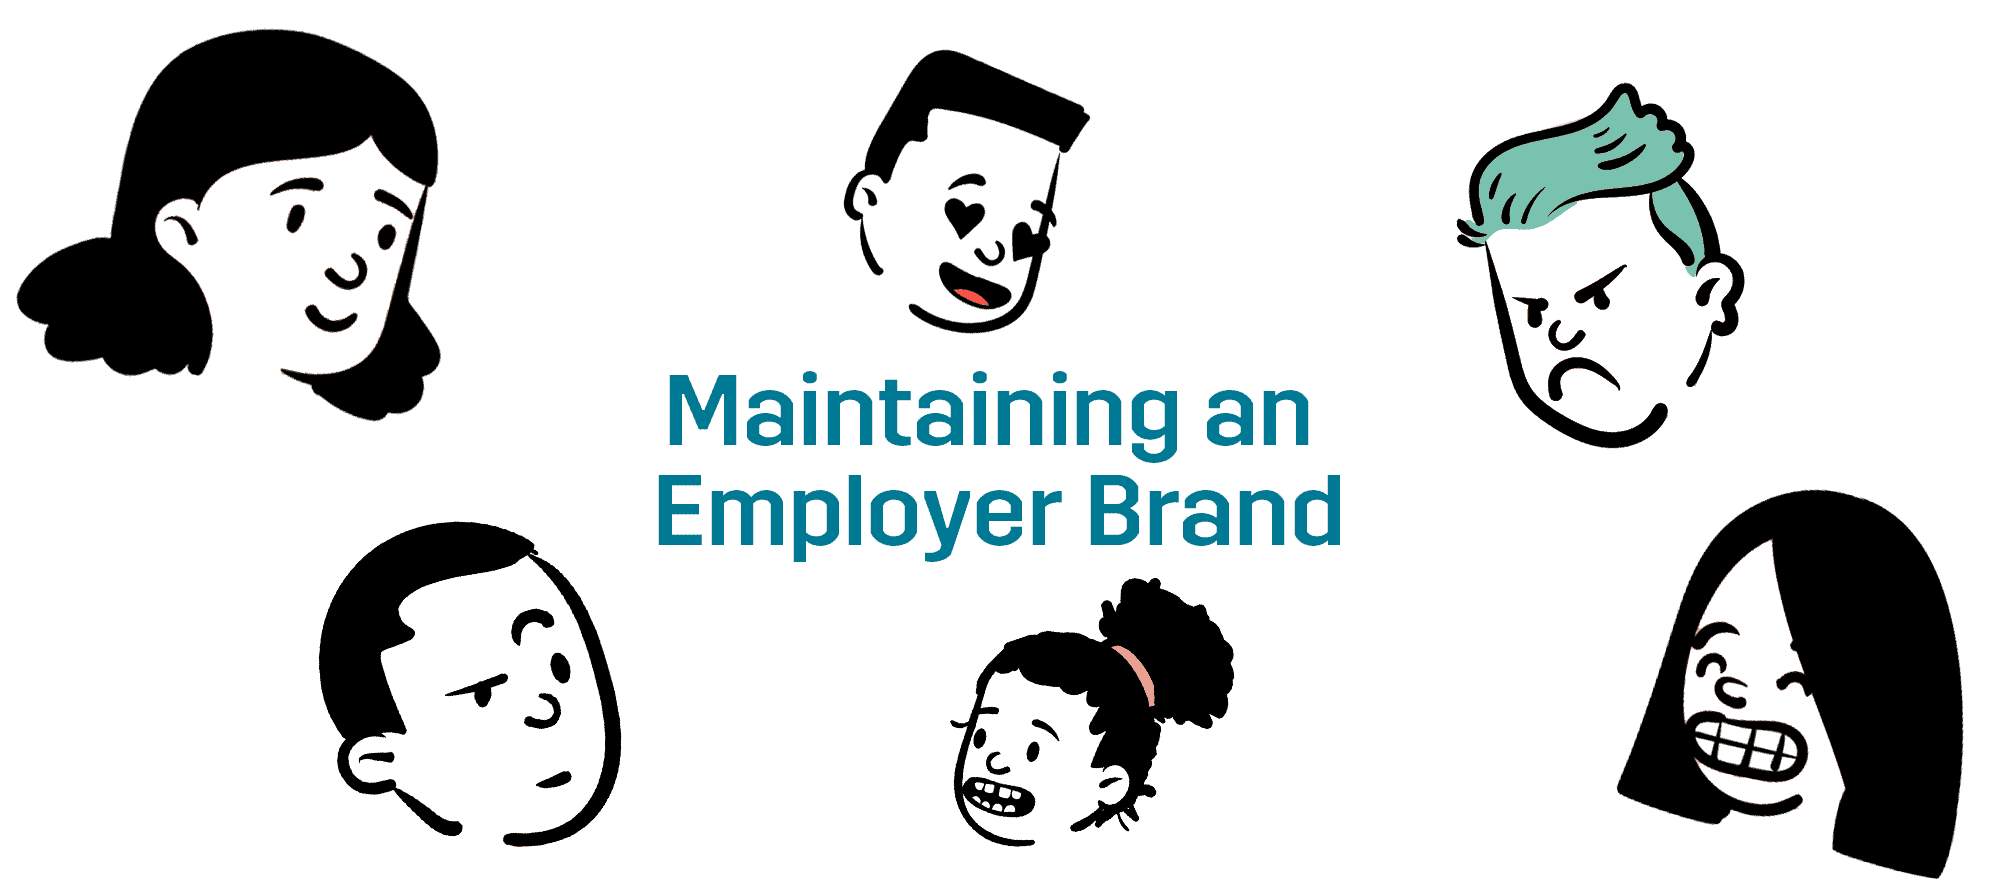 maintain-employer-brand-for-candidate-experience-illustration